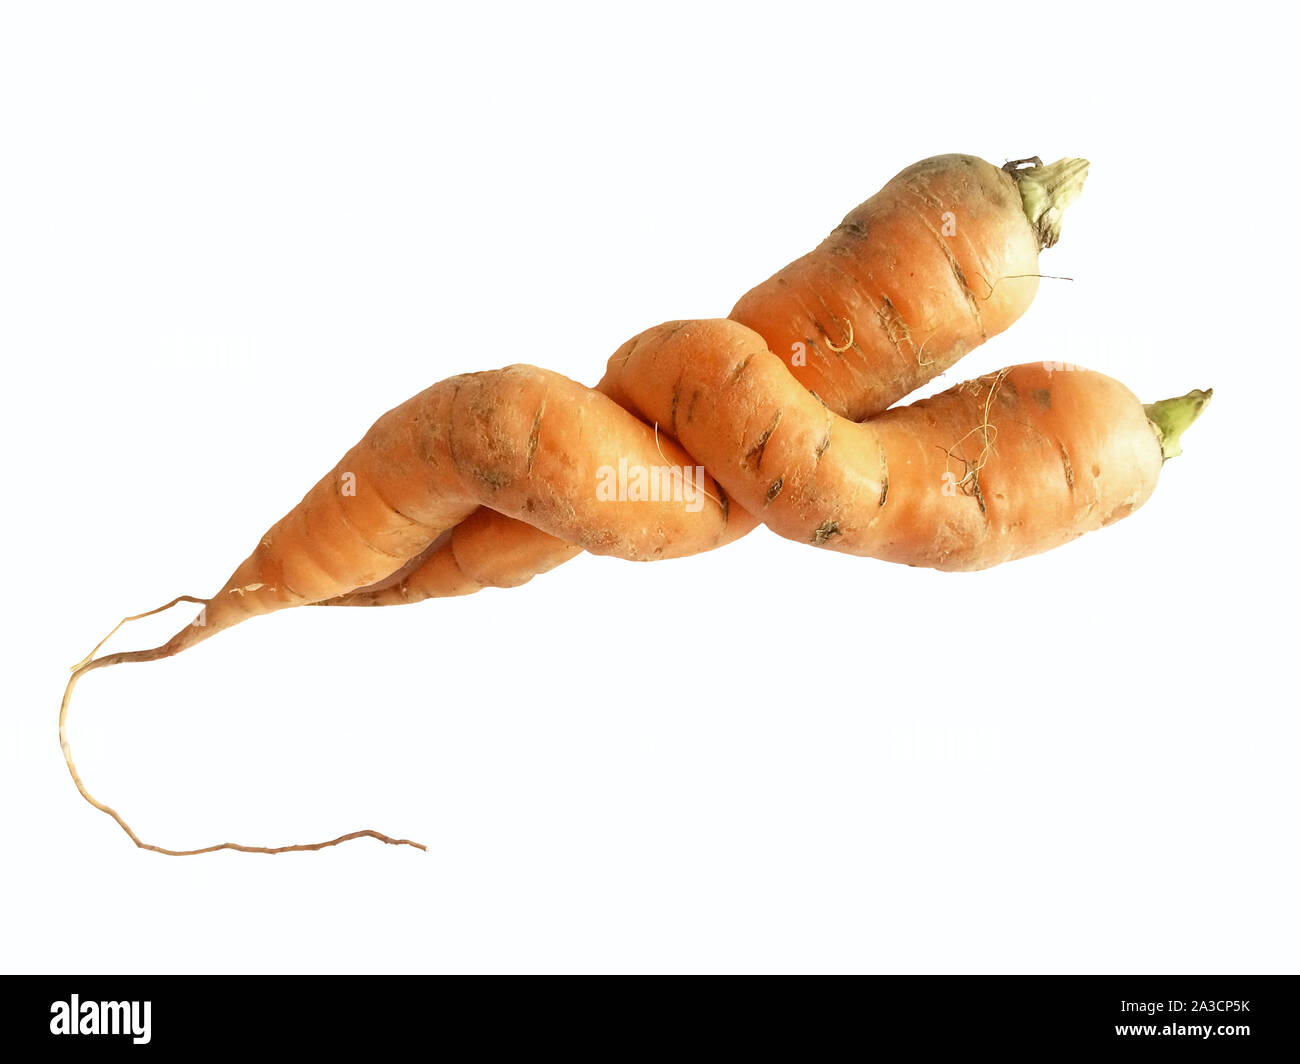 Two odd shaped carrots isolated on white background (clipping path included) Stock Photo